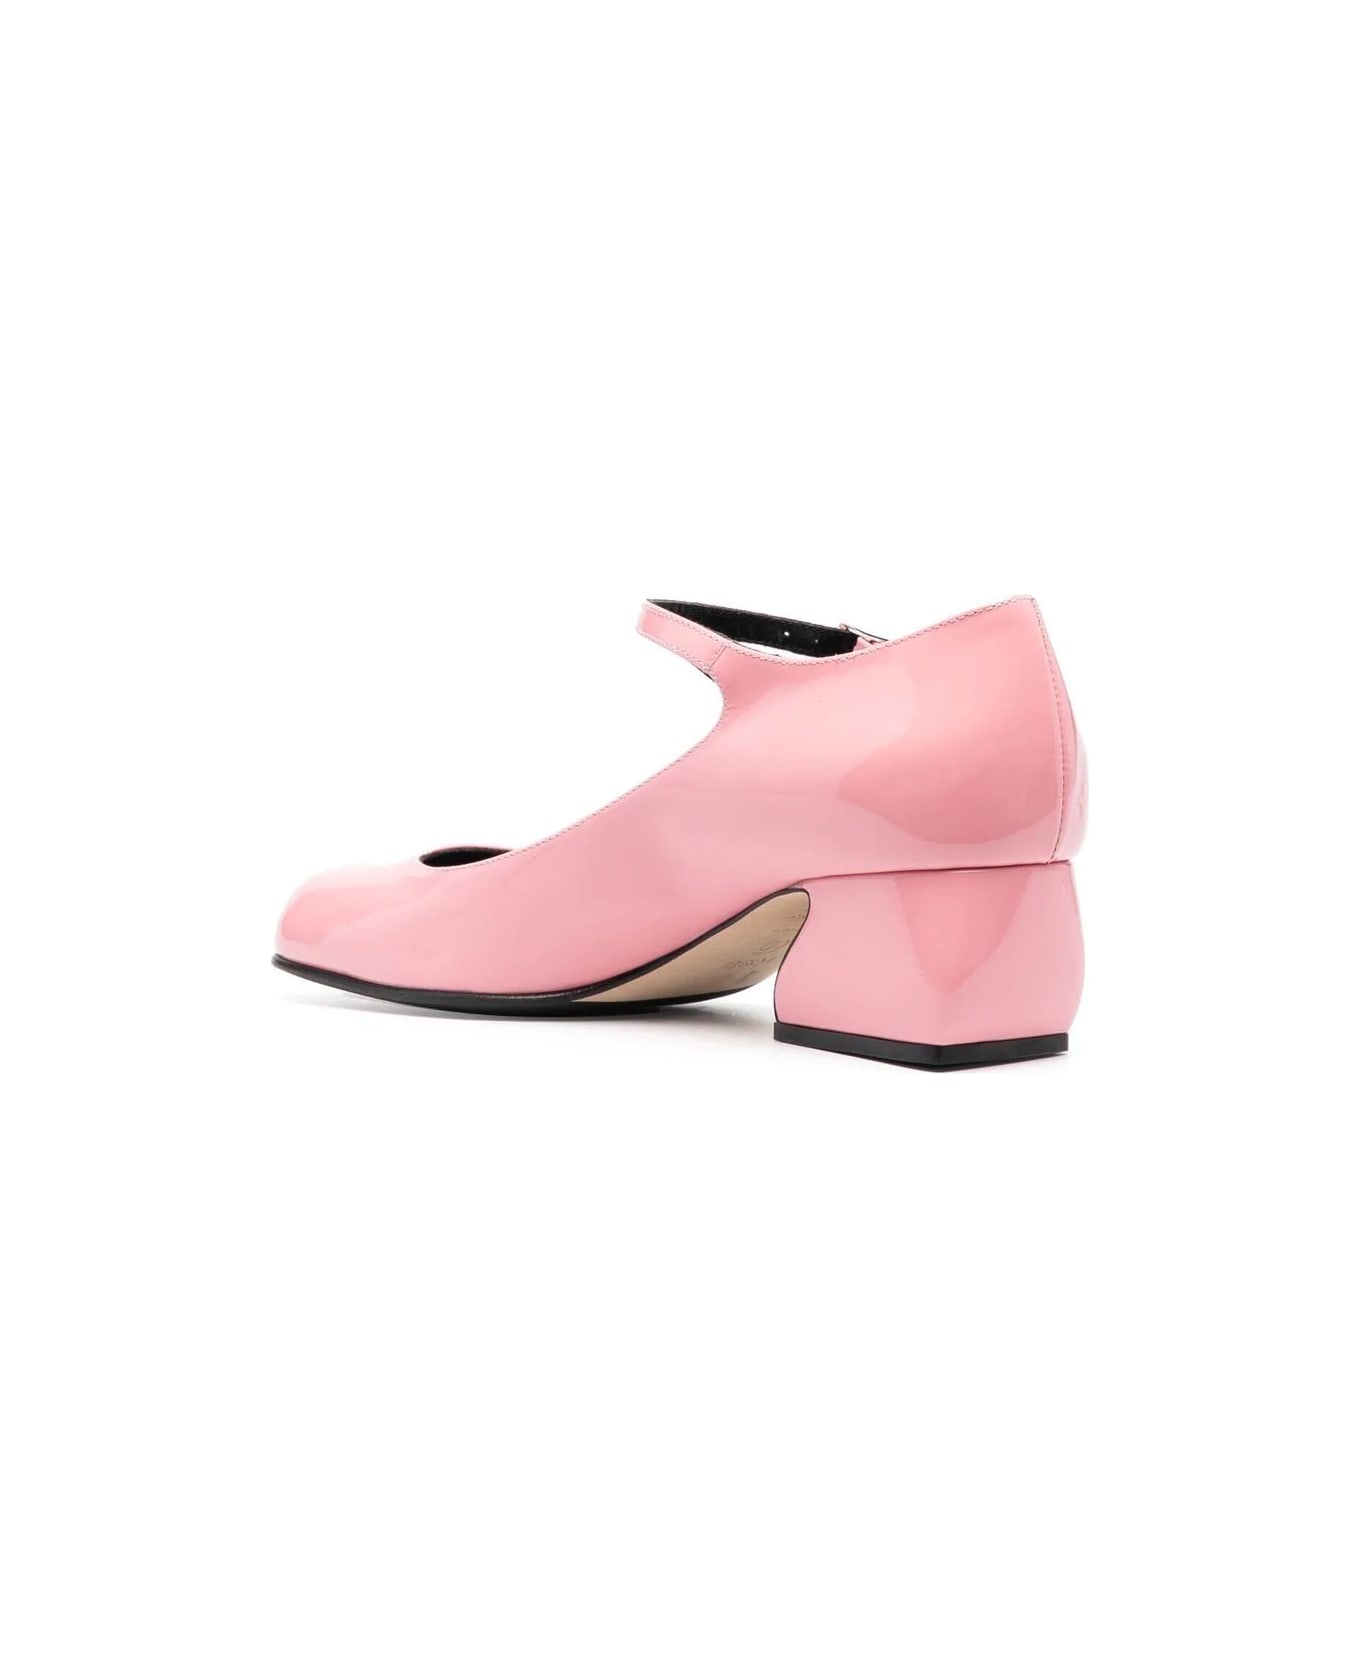 SI Rossi Pump 45 - Alizee Pink ハイヒール